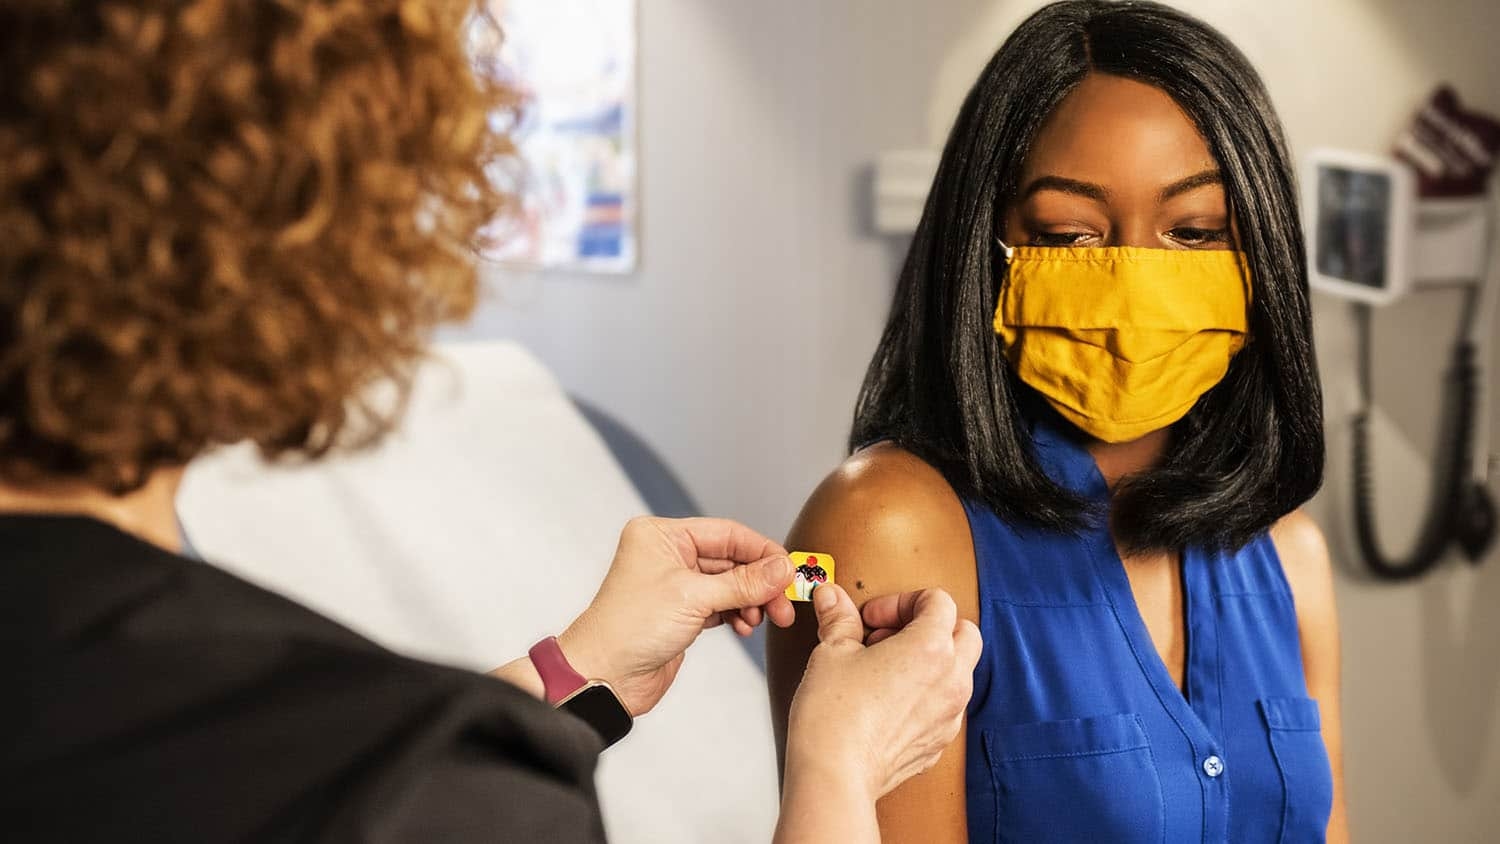 woman with red hair puts band-aid on black woman wearing a face mask; the image suggests that the black woman just received her vaccine shot